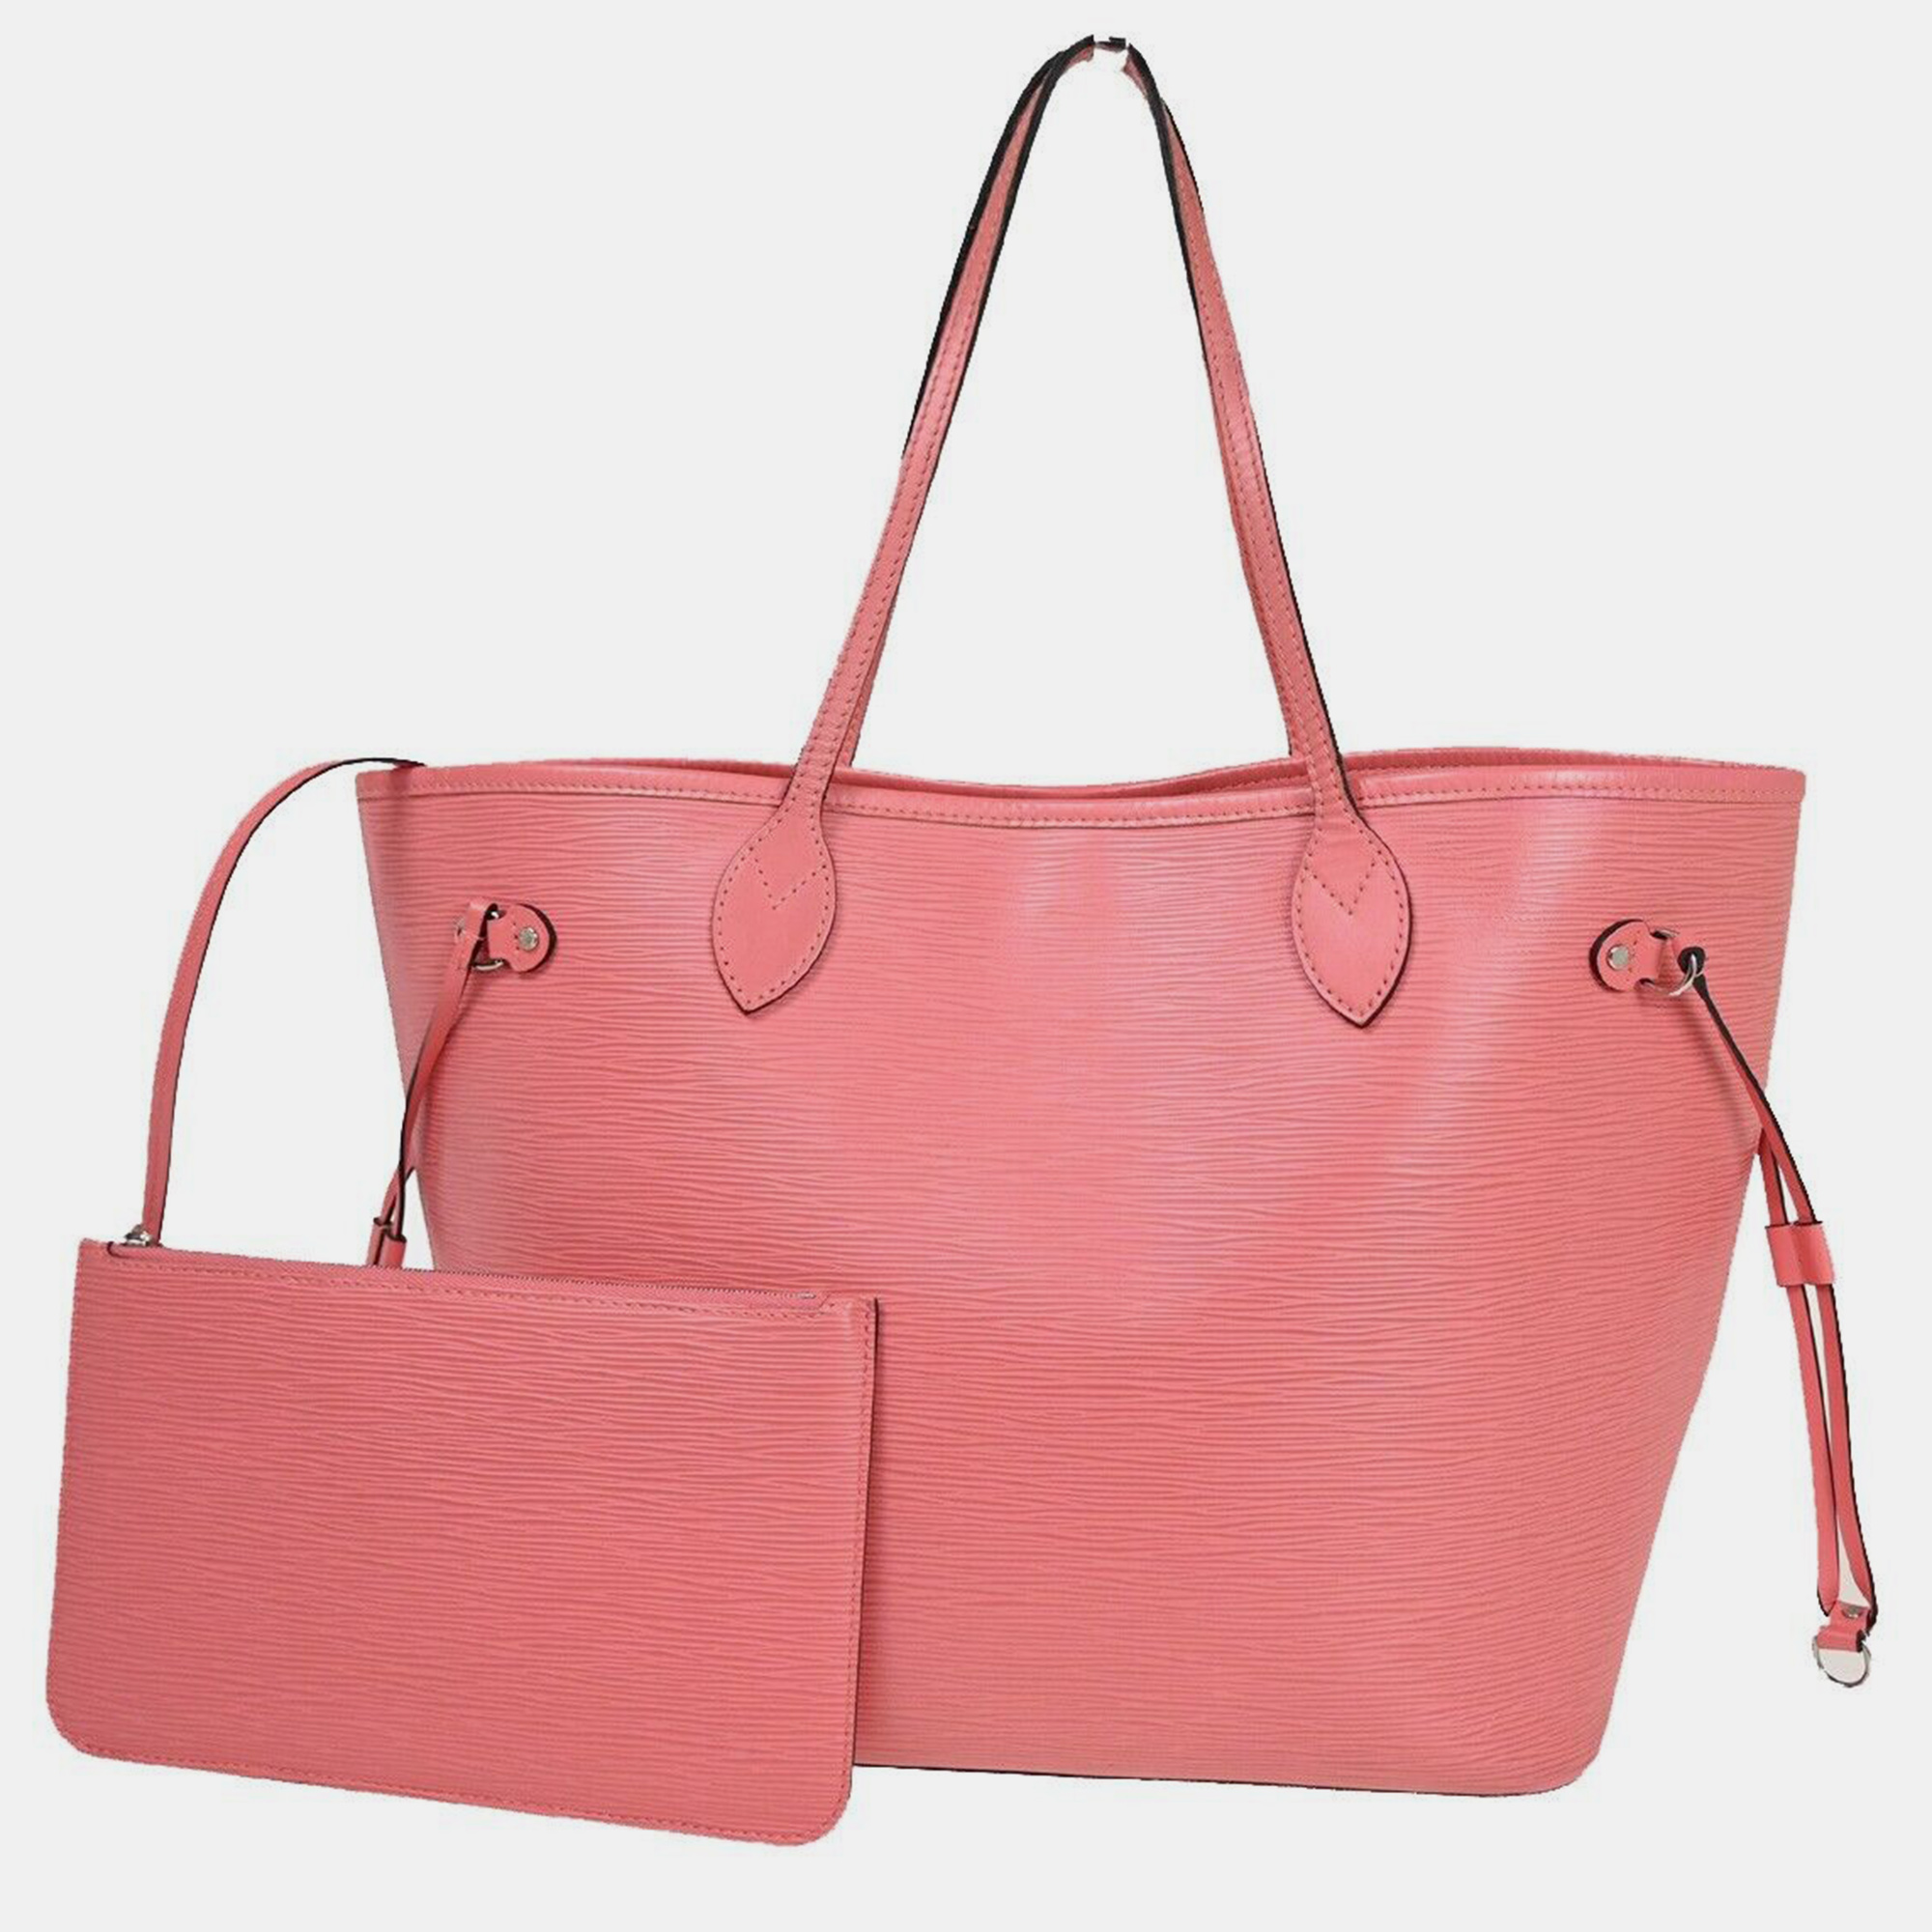 Louis vuitton pink epi leather neverfull mm tote bag